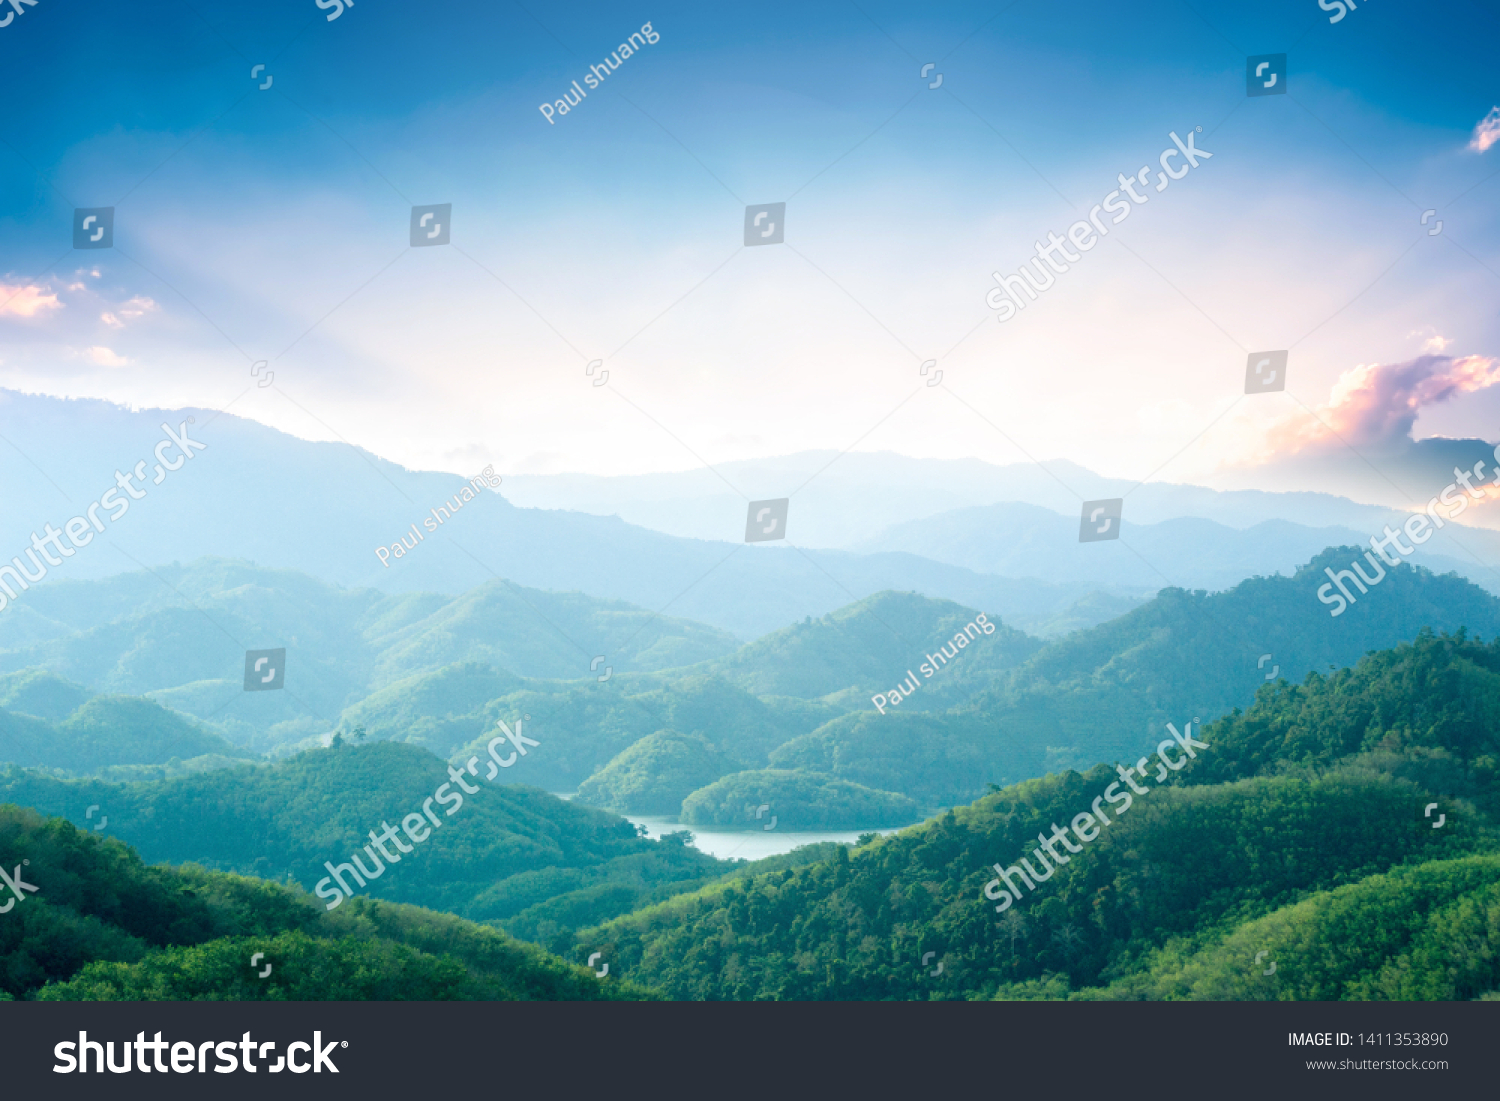 World Environment Day concept: Green mountains and beautiful sky clouds under the blue sky #1411353890